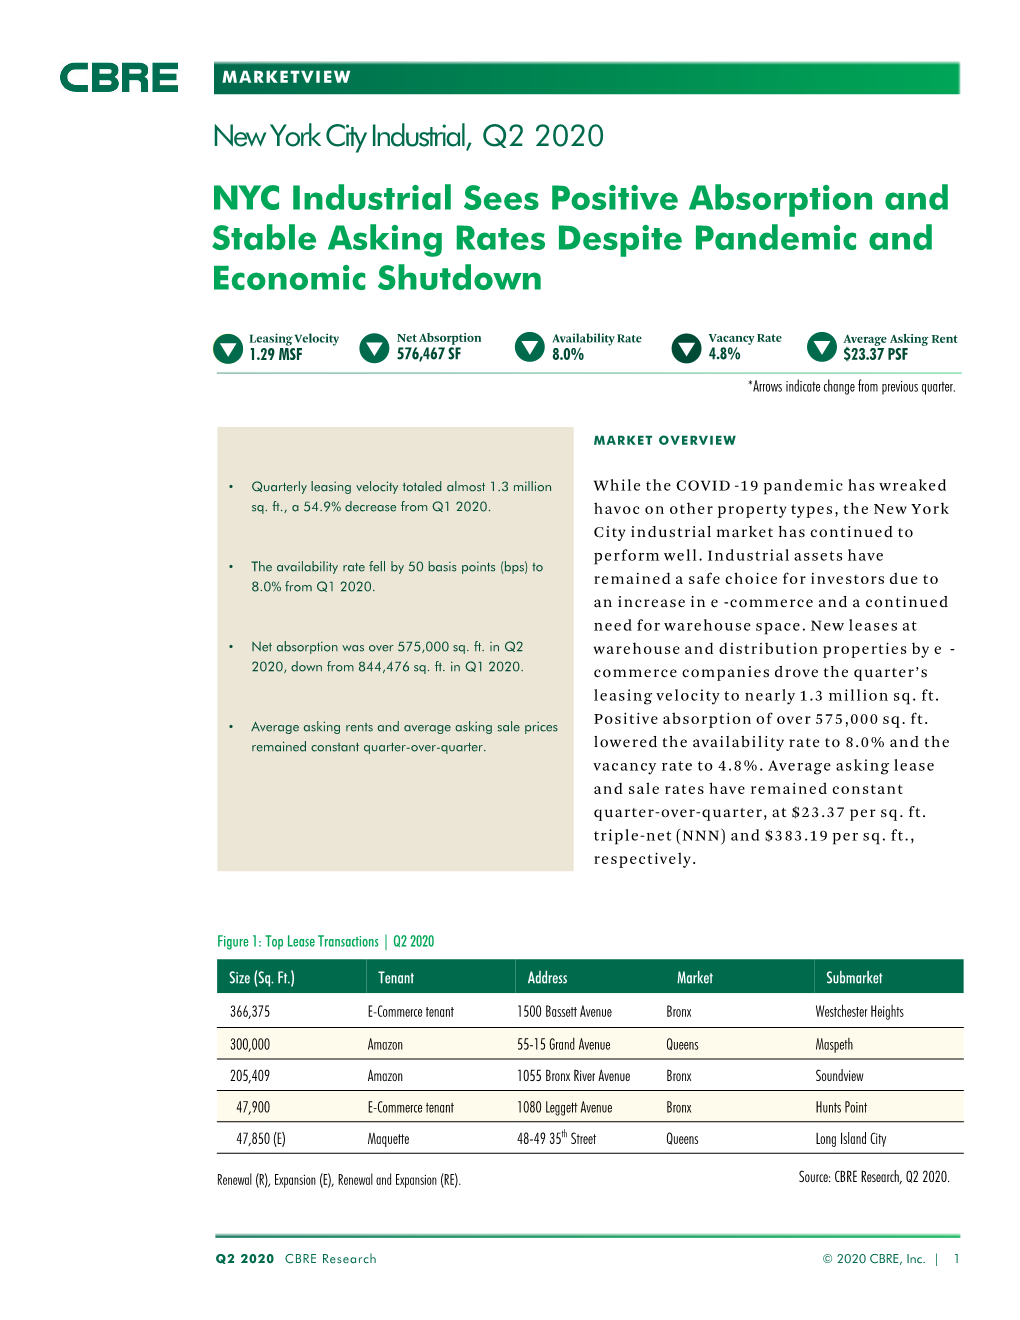 NYC Industrial Sees Positive Absorption and Stable Asking Rates Despite Pandemic and Economic Shutdown